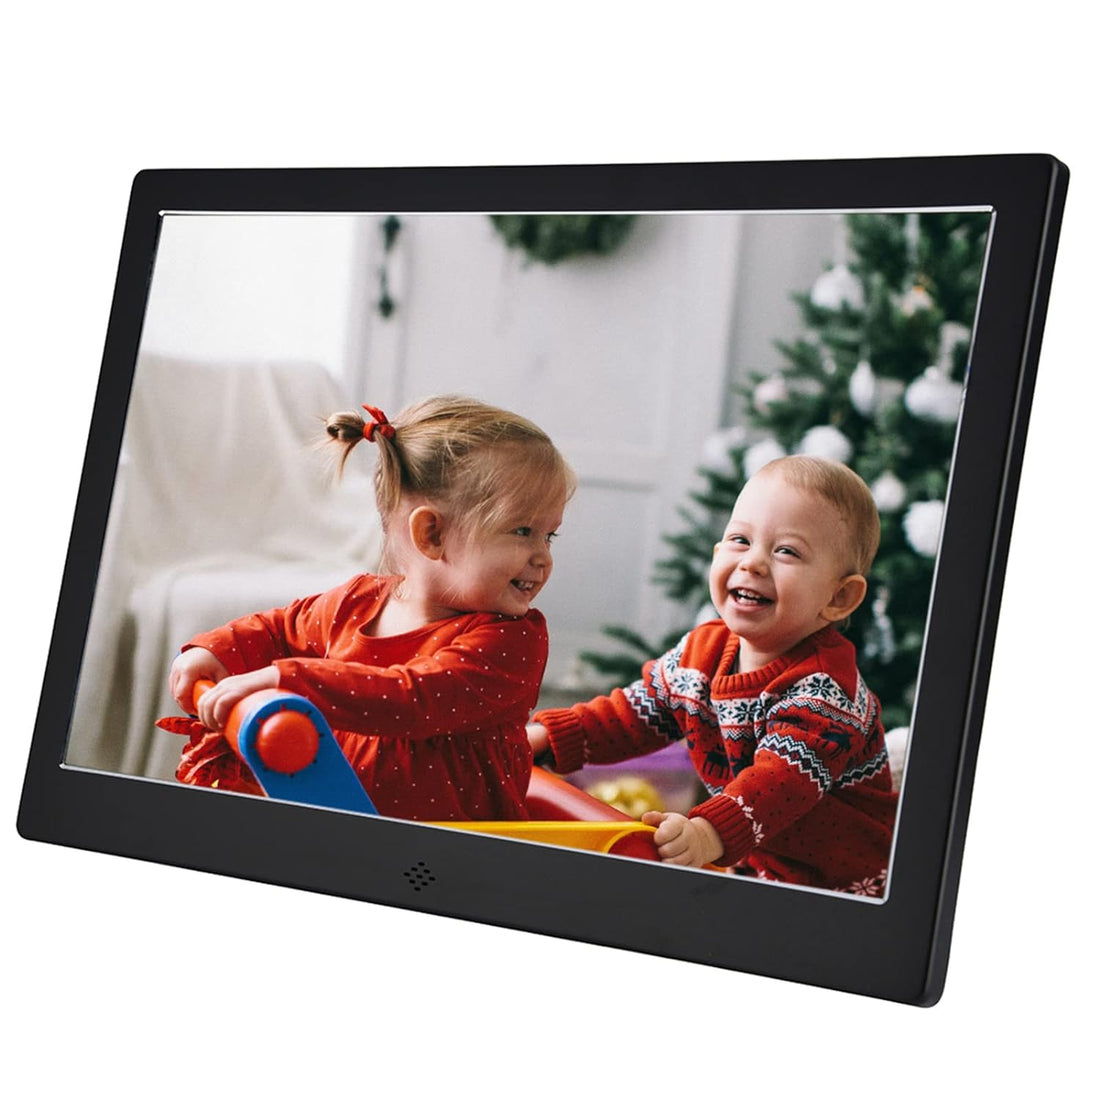 12 Inch Smart Digital Photo Frame 1280x800 TFT LED Screen, Calendar, Alarm Clock, Timing On/Off Multifunctional Digital Photo Frame for Friends and Family(Cool Black)